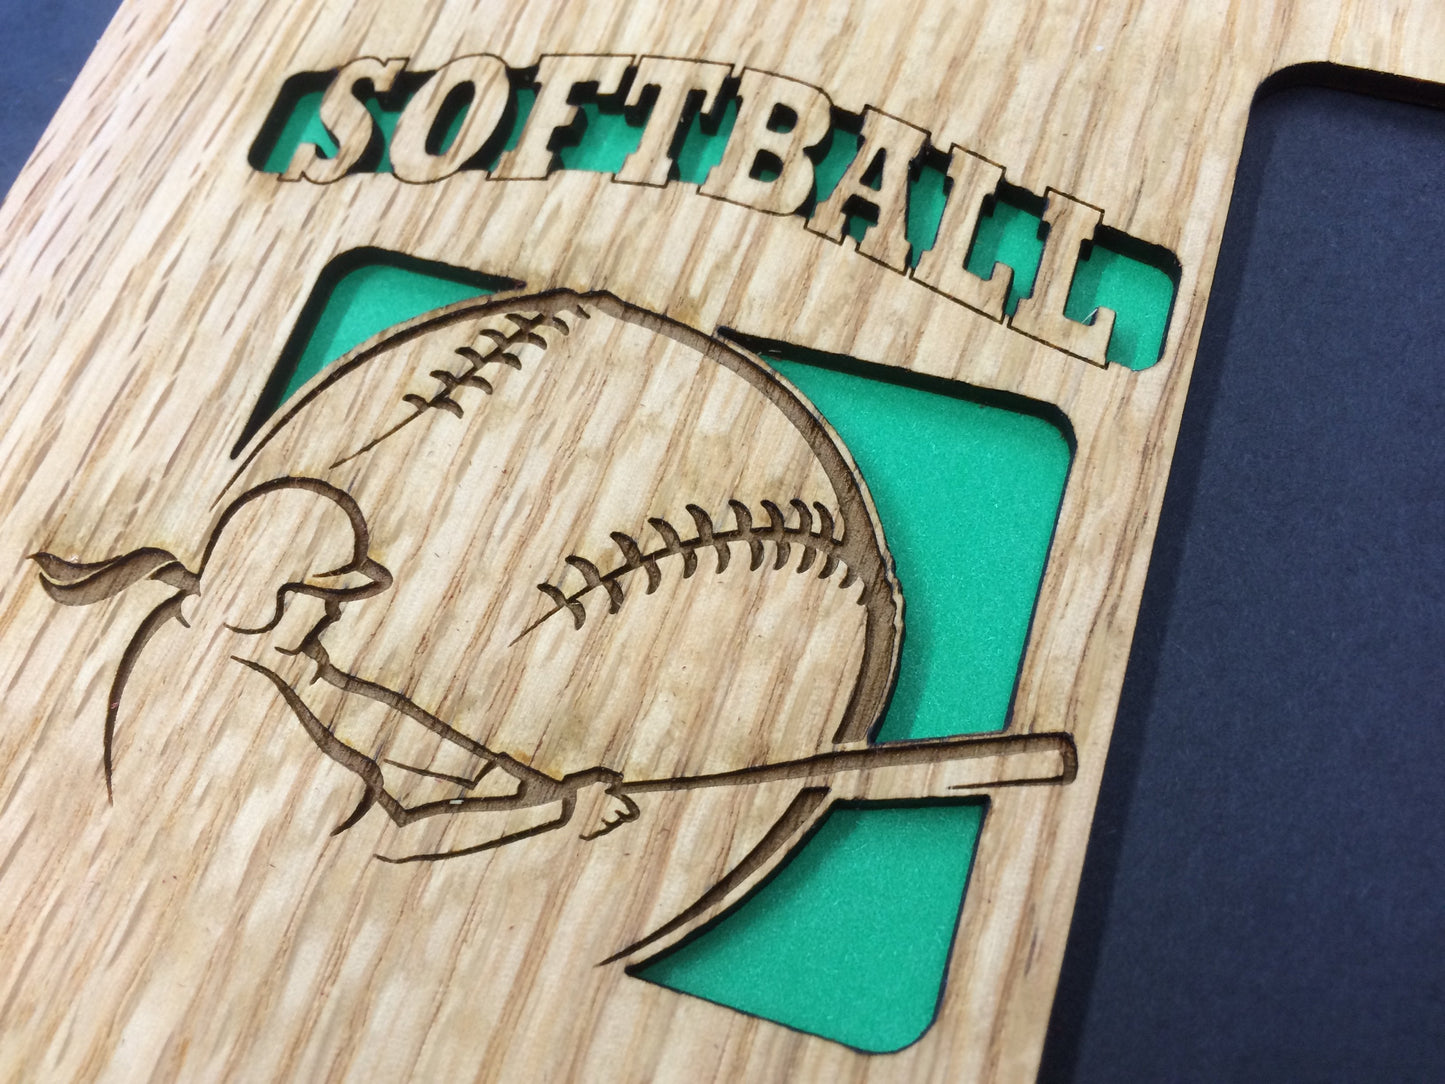 Softball Picture Frame